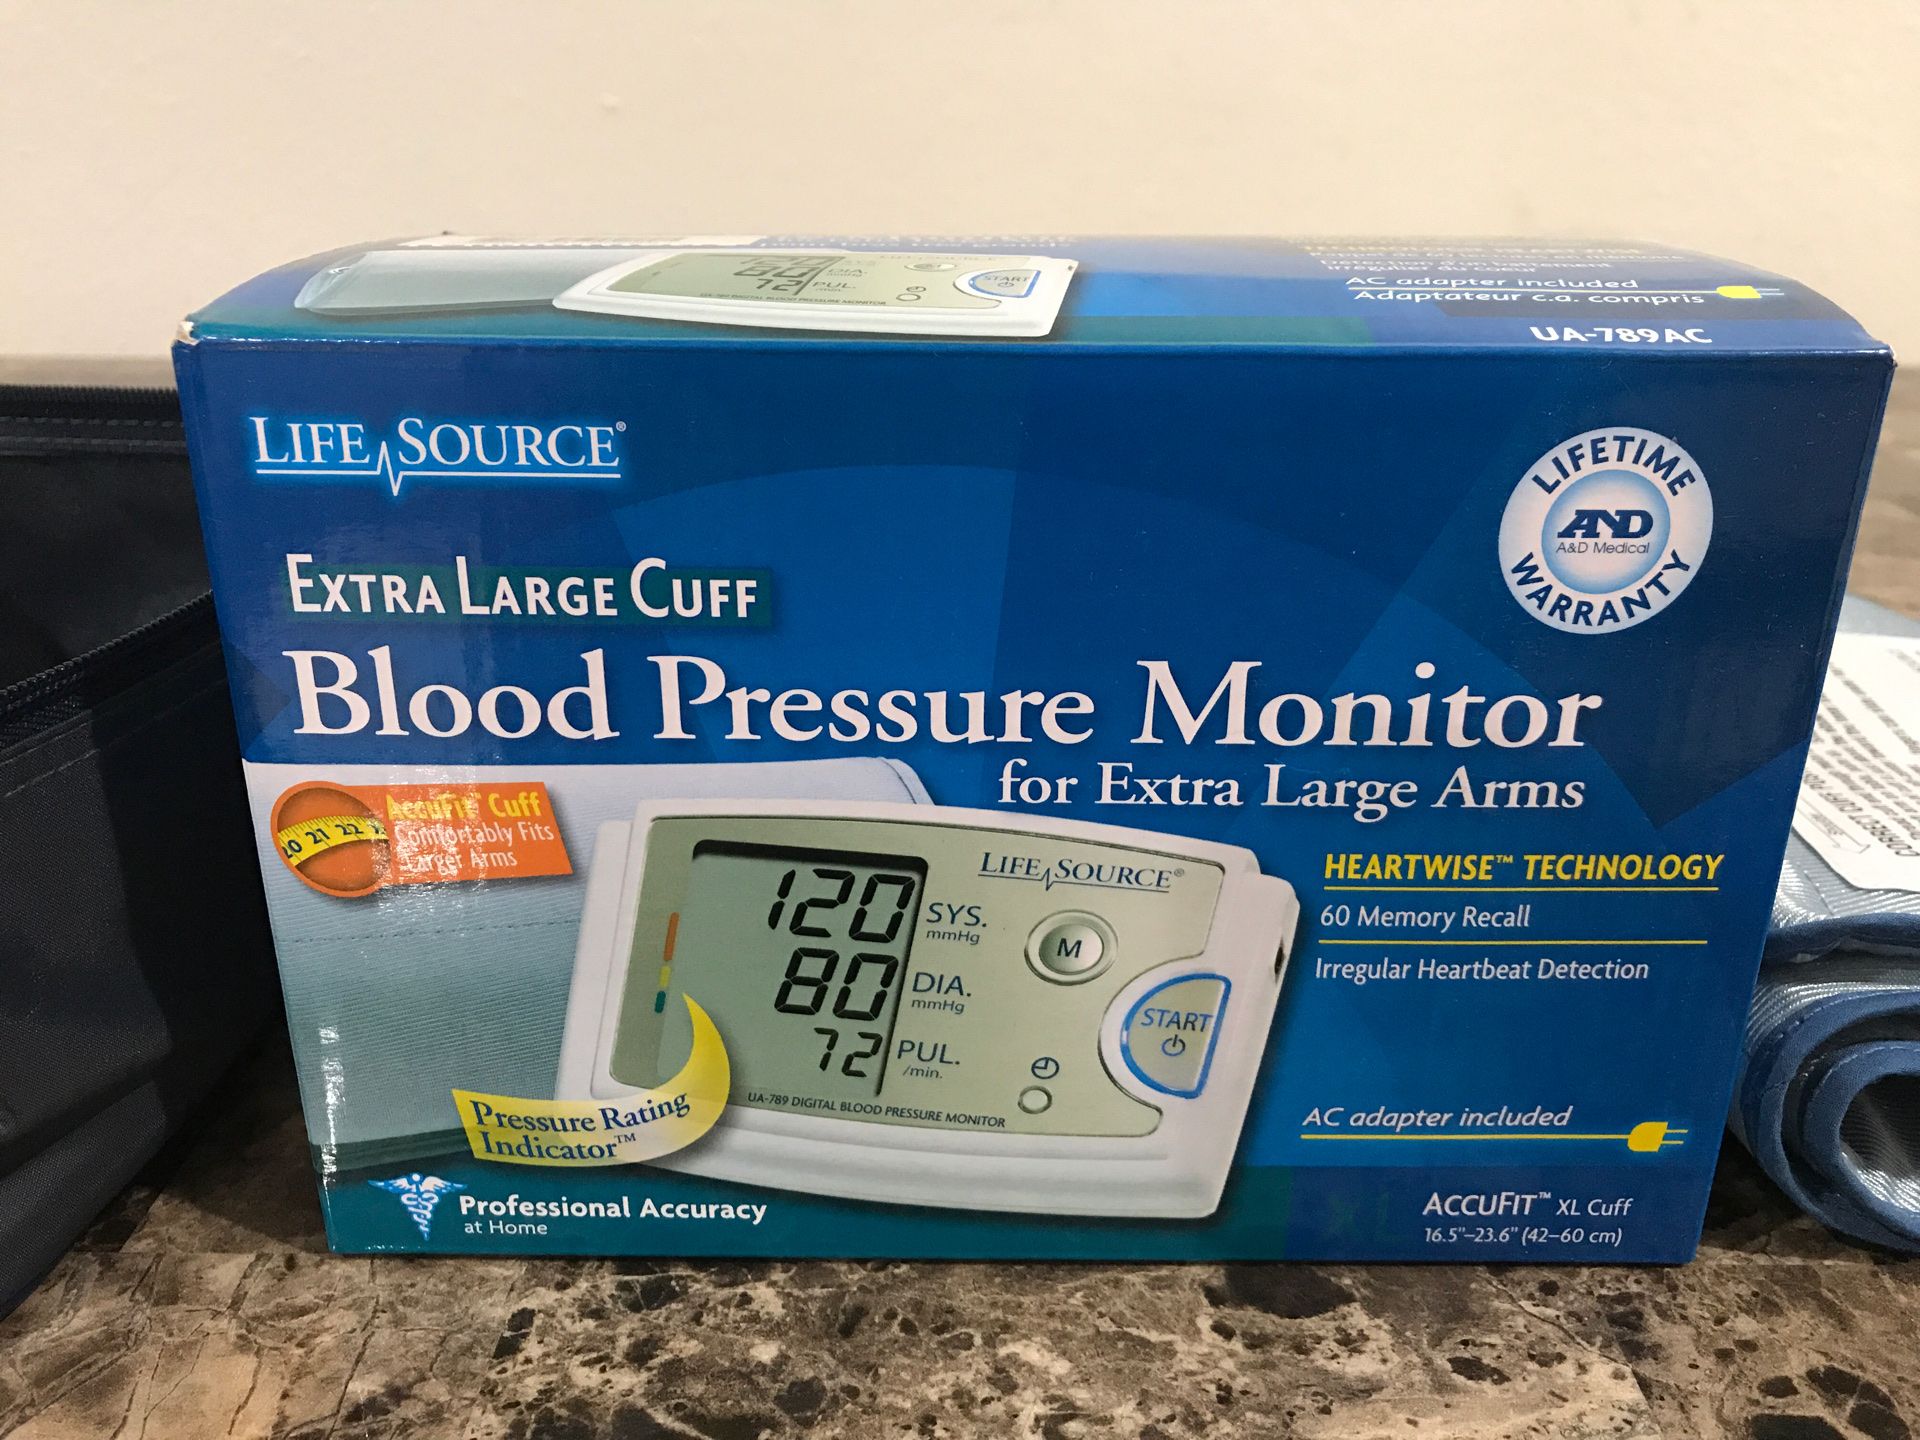 Digital Blood Pressure Monitor for Extra Large Arms